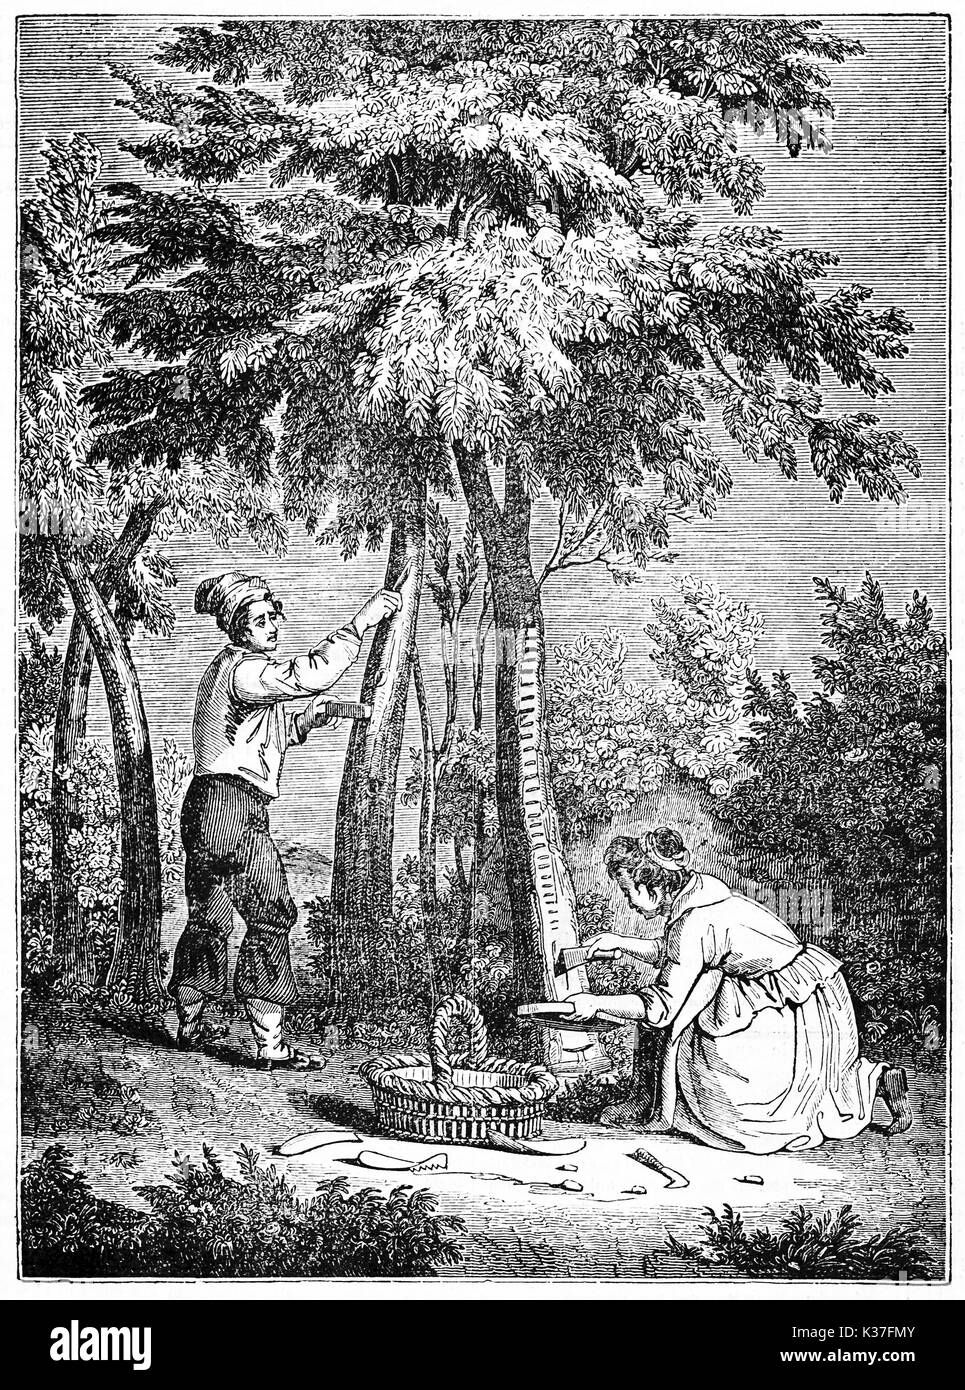 Fraxinus incision and manna harvesting by two medieval people. Old Illustration by unidentified author published on Magasin Pittoresque Paris 1834 Stock Photo